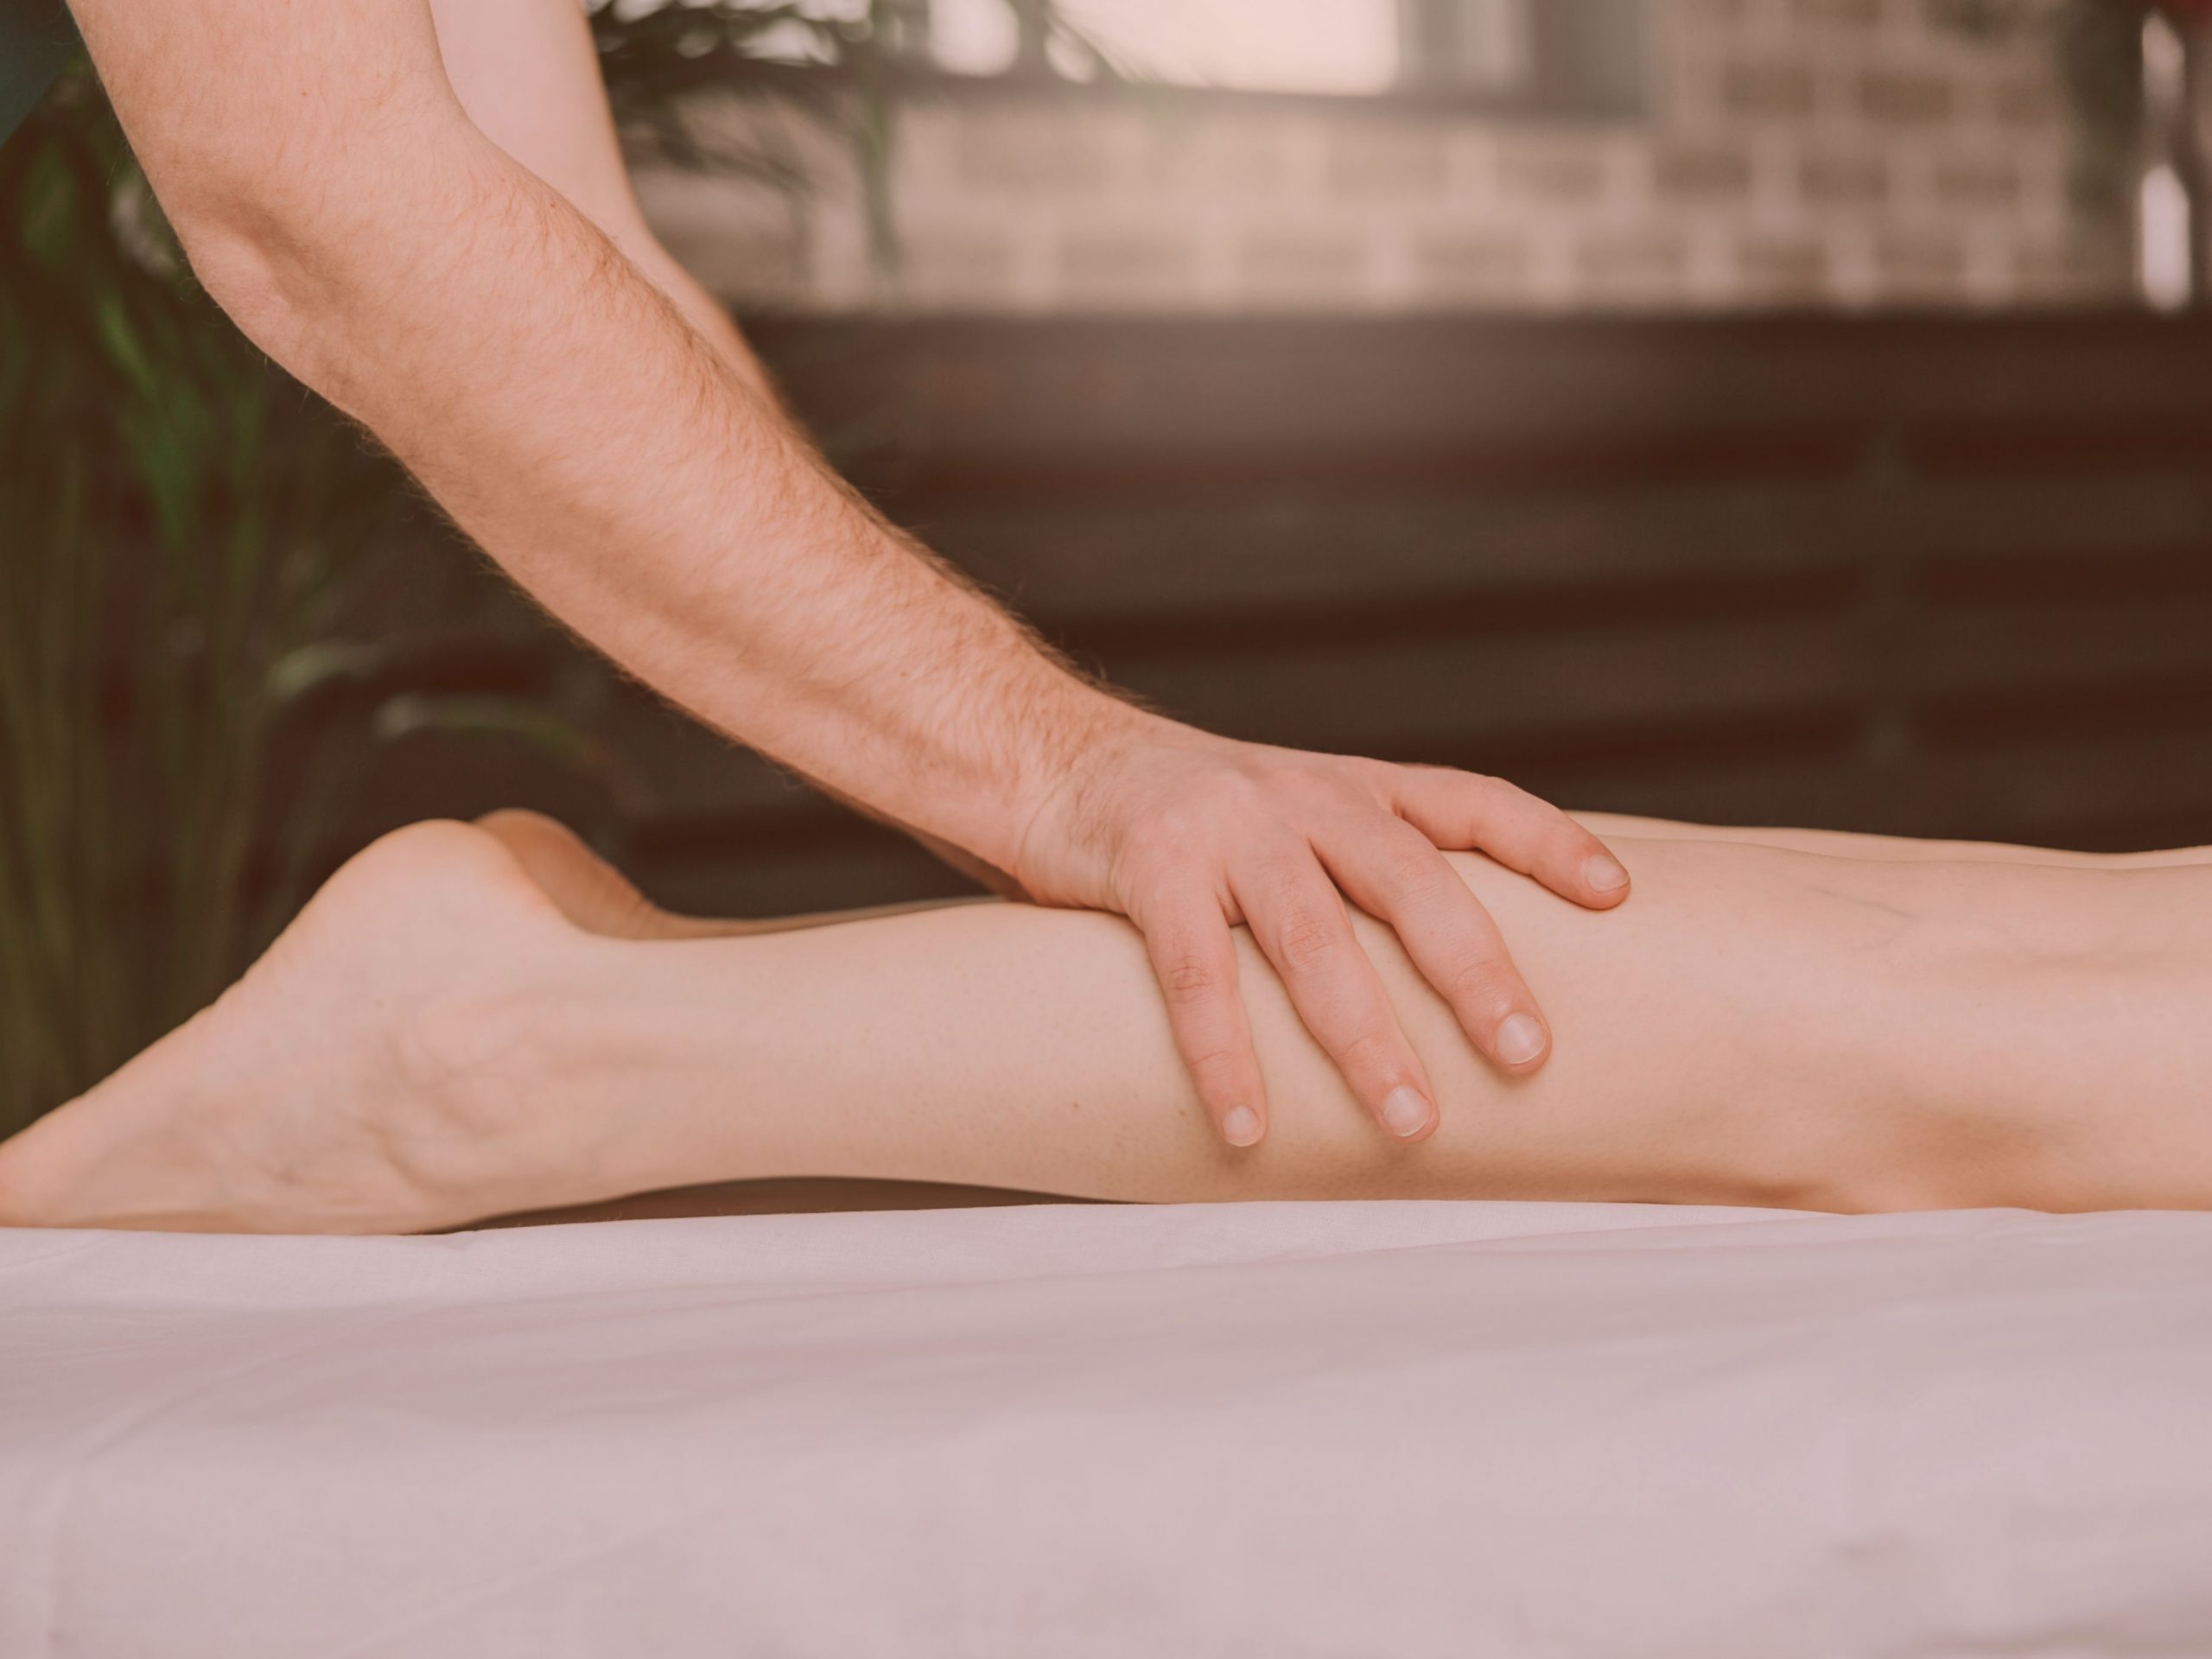 What are the benefits of Manual Lymphatic Drainage MLD?